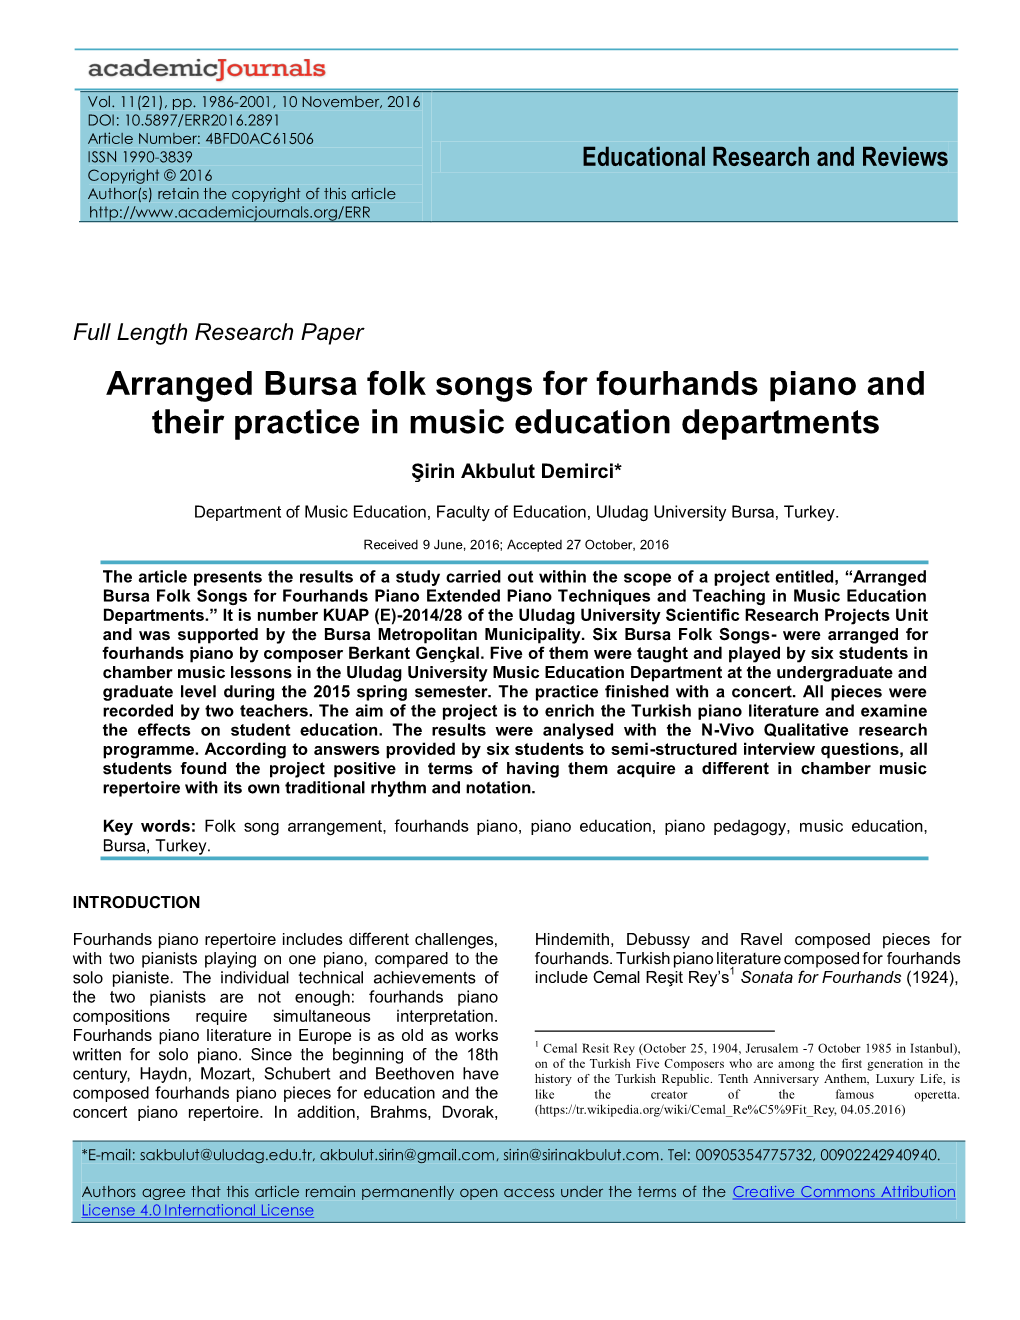 Arranged Bursa Folk Songs for Fourhands Piano and Their Practice in Music Education Departments